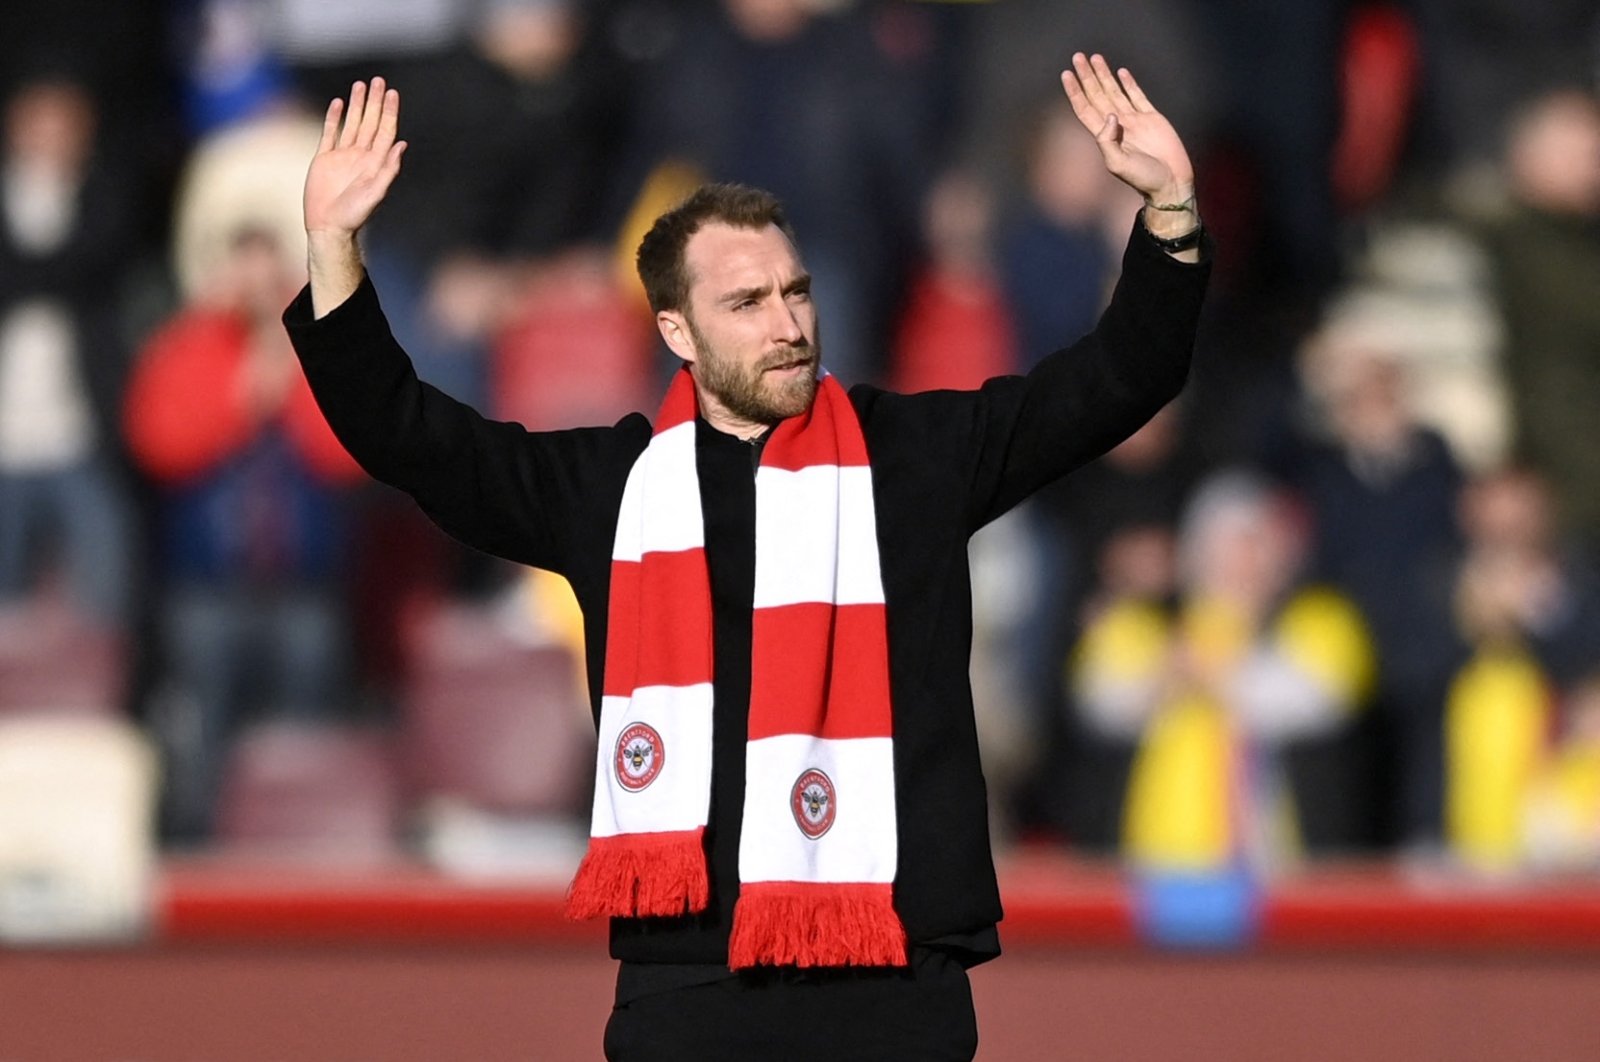 Brentford&#039;s Christian Eriksen is unveiled to fans before a Premier League match against Crystal Palace, Brentford Community Stadium, London, England, Feb. 12, 2022. (Reuters Photo)